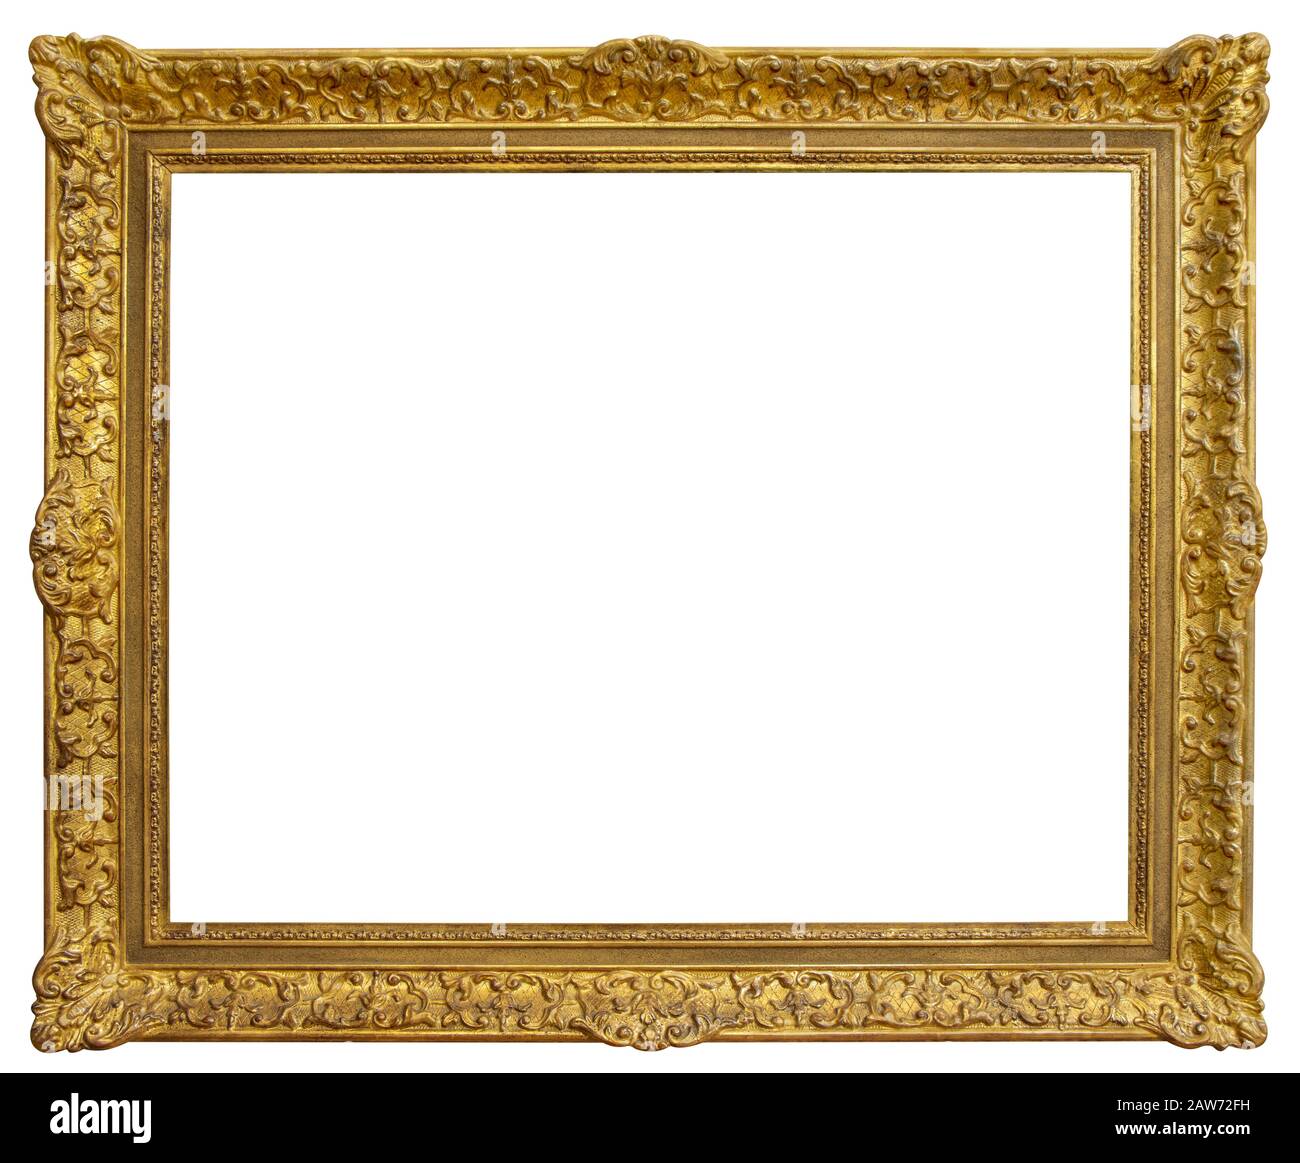 Rectangle Old gilded golden wooden frame isolated on white background with clipping path Stock Photo